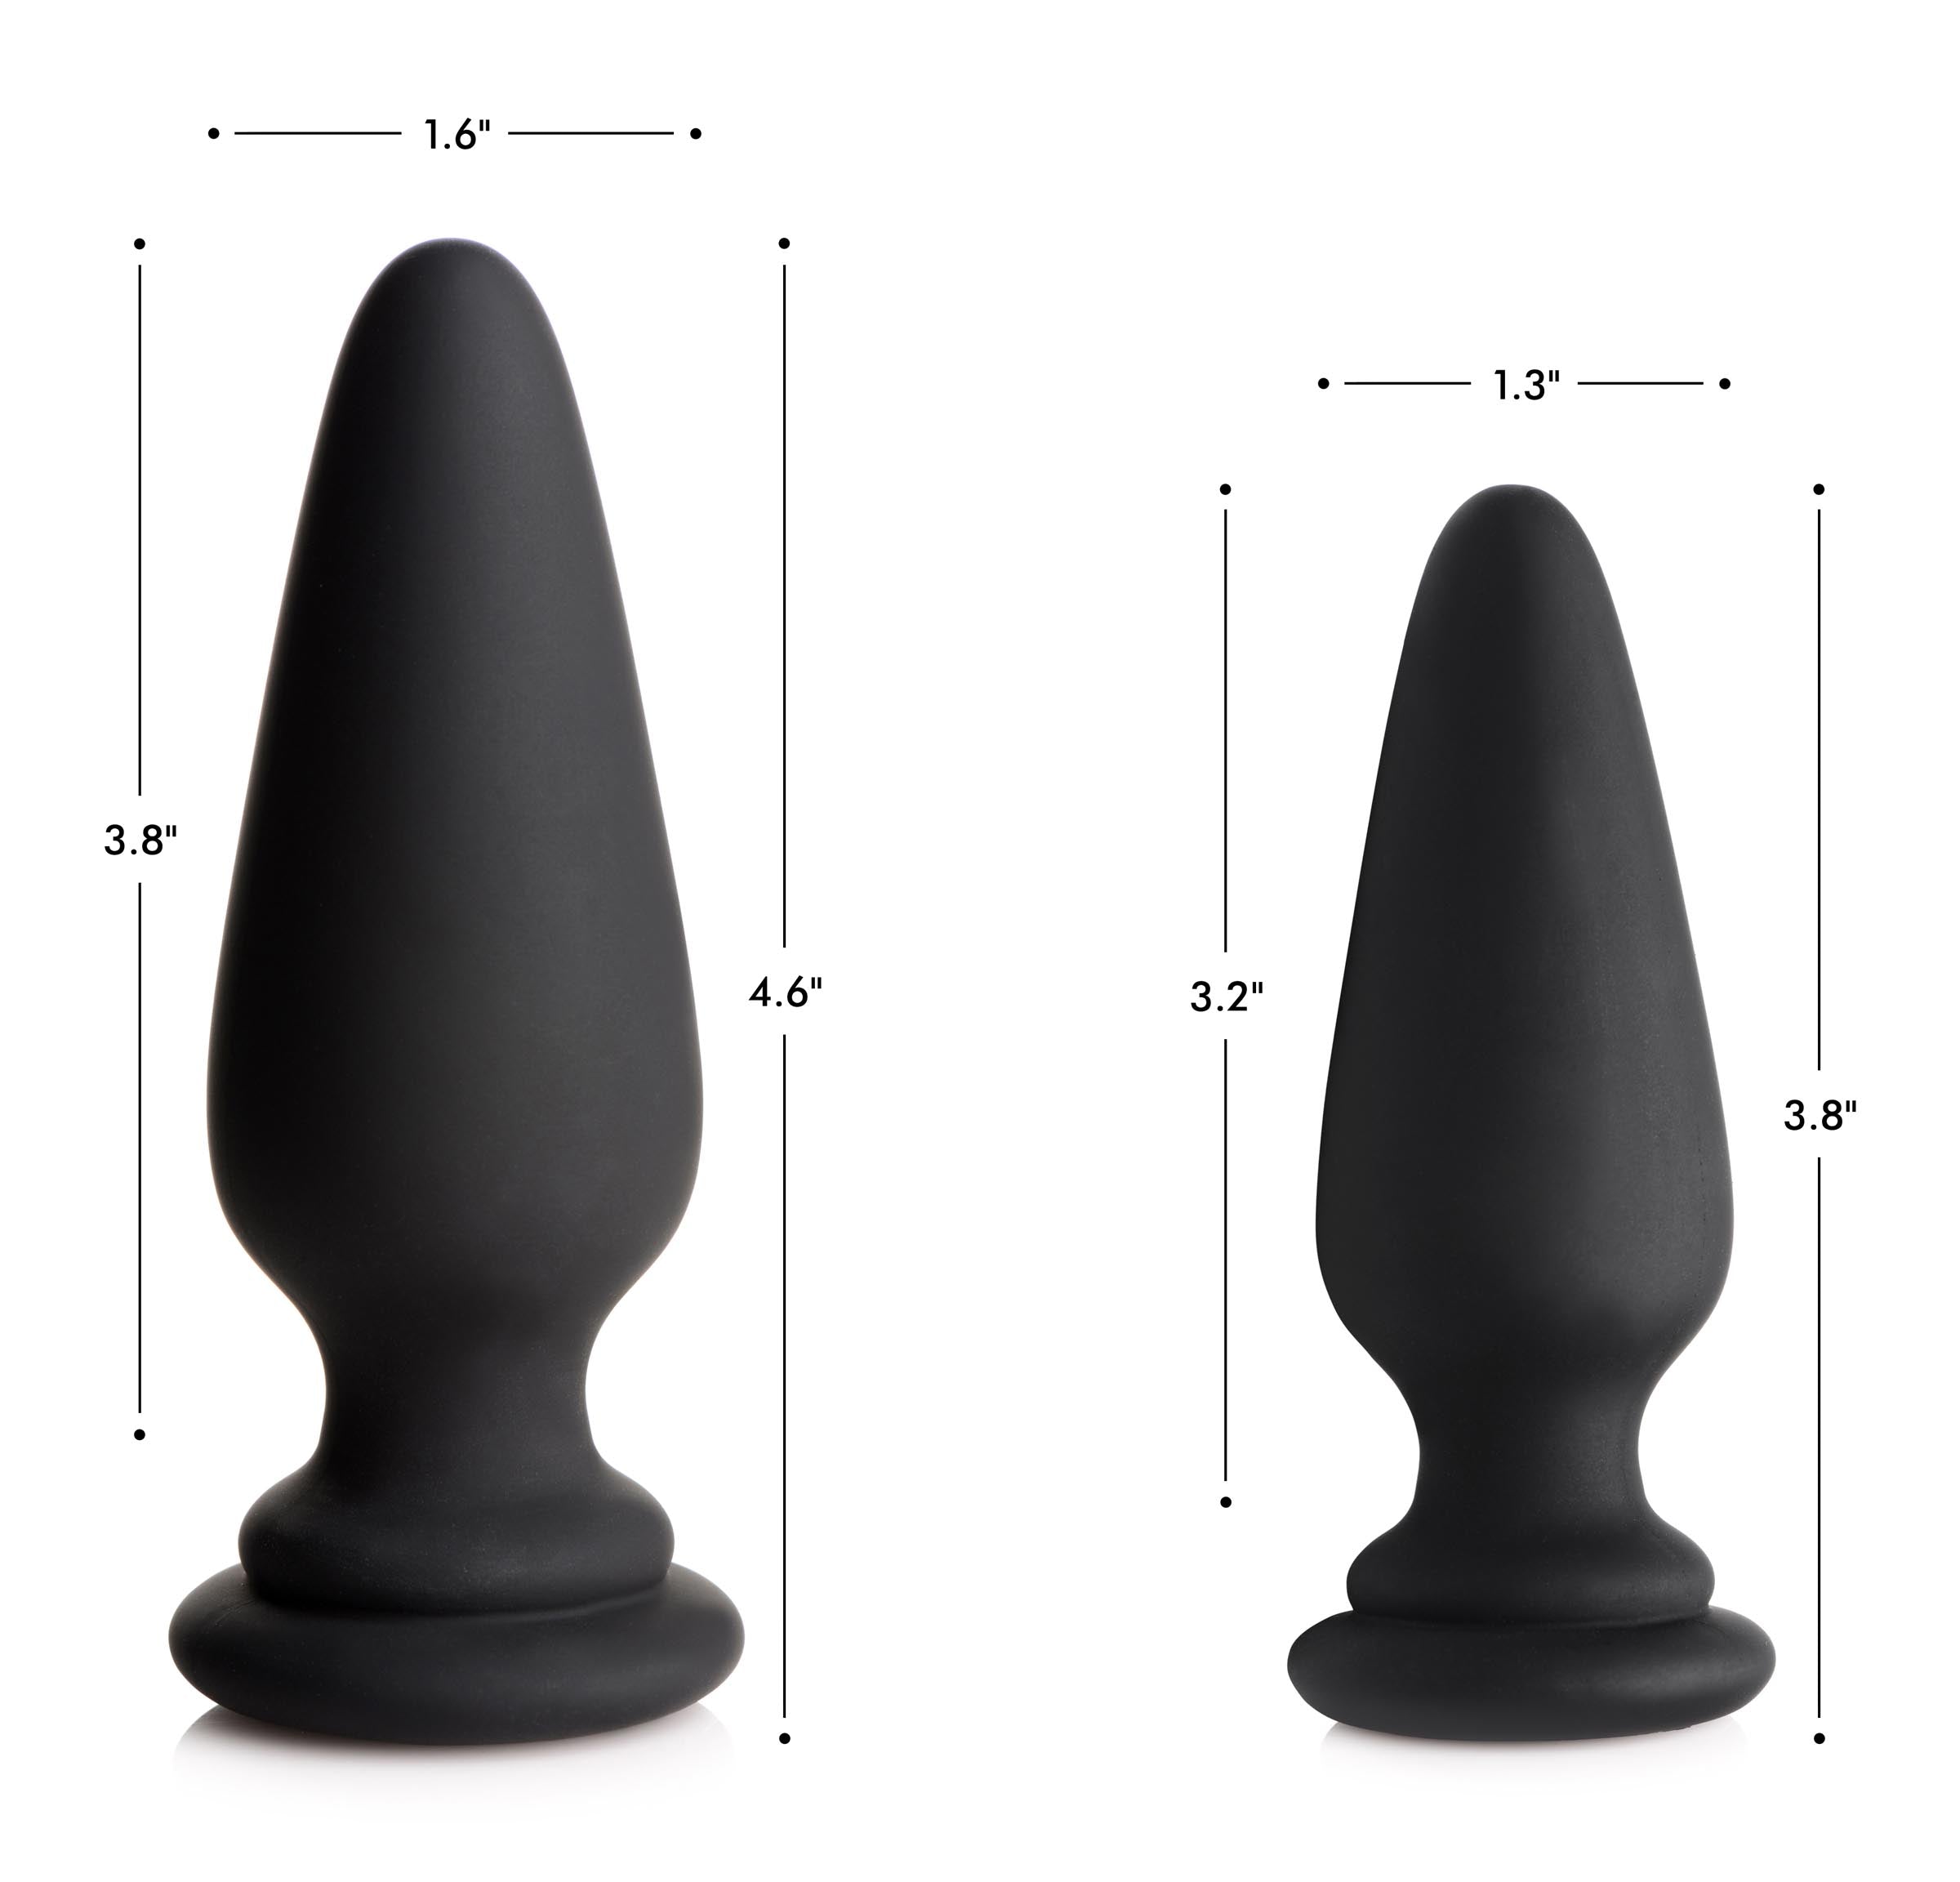 Large Anal Plug with Interchangeable Bunny Tail